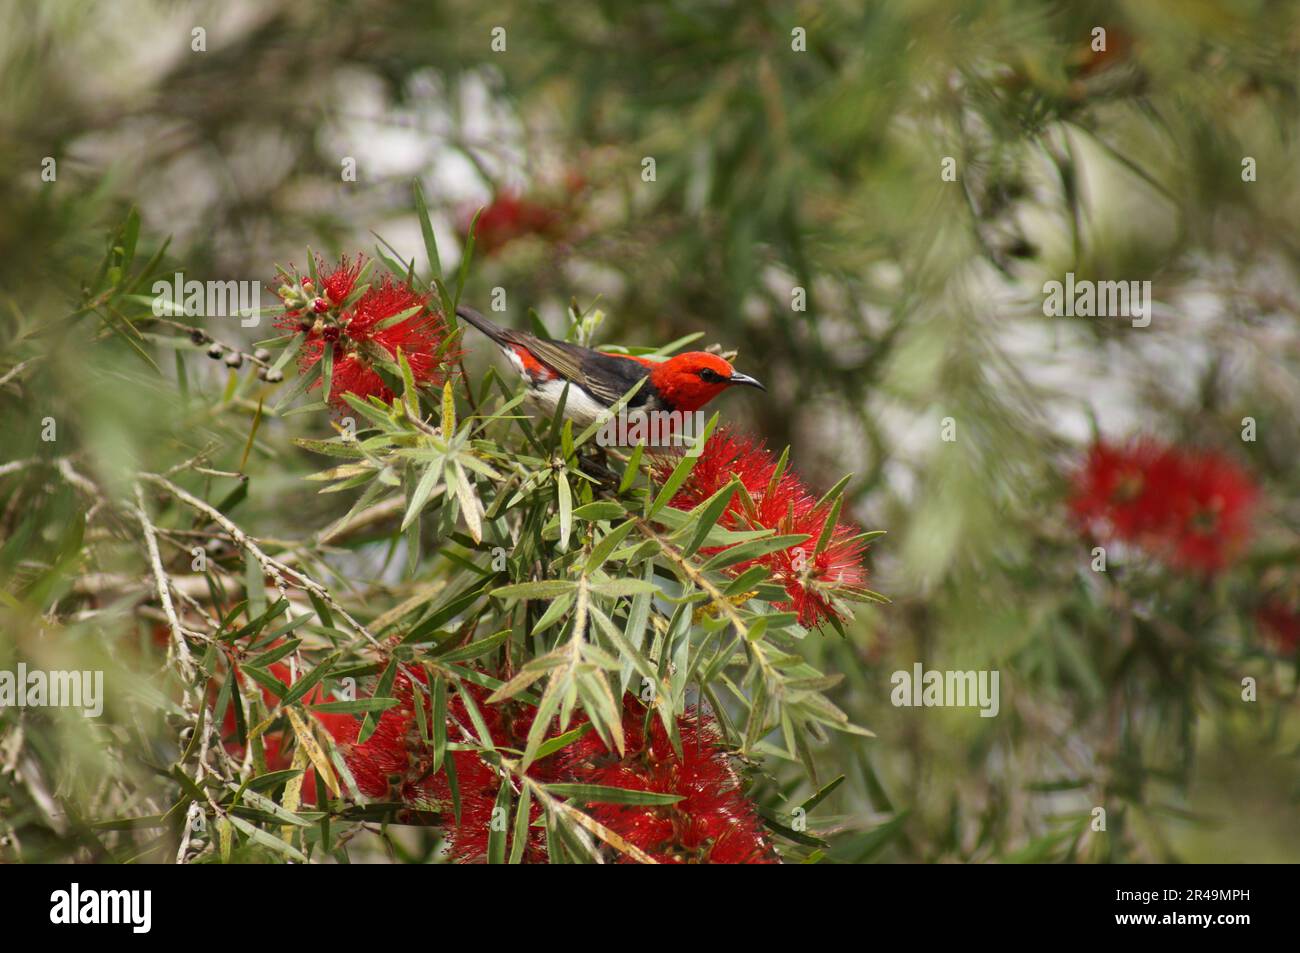 A vibrant scarlet myzomela bird perched atop a lush green tree in a natural outdoor setting Stock Photo